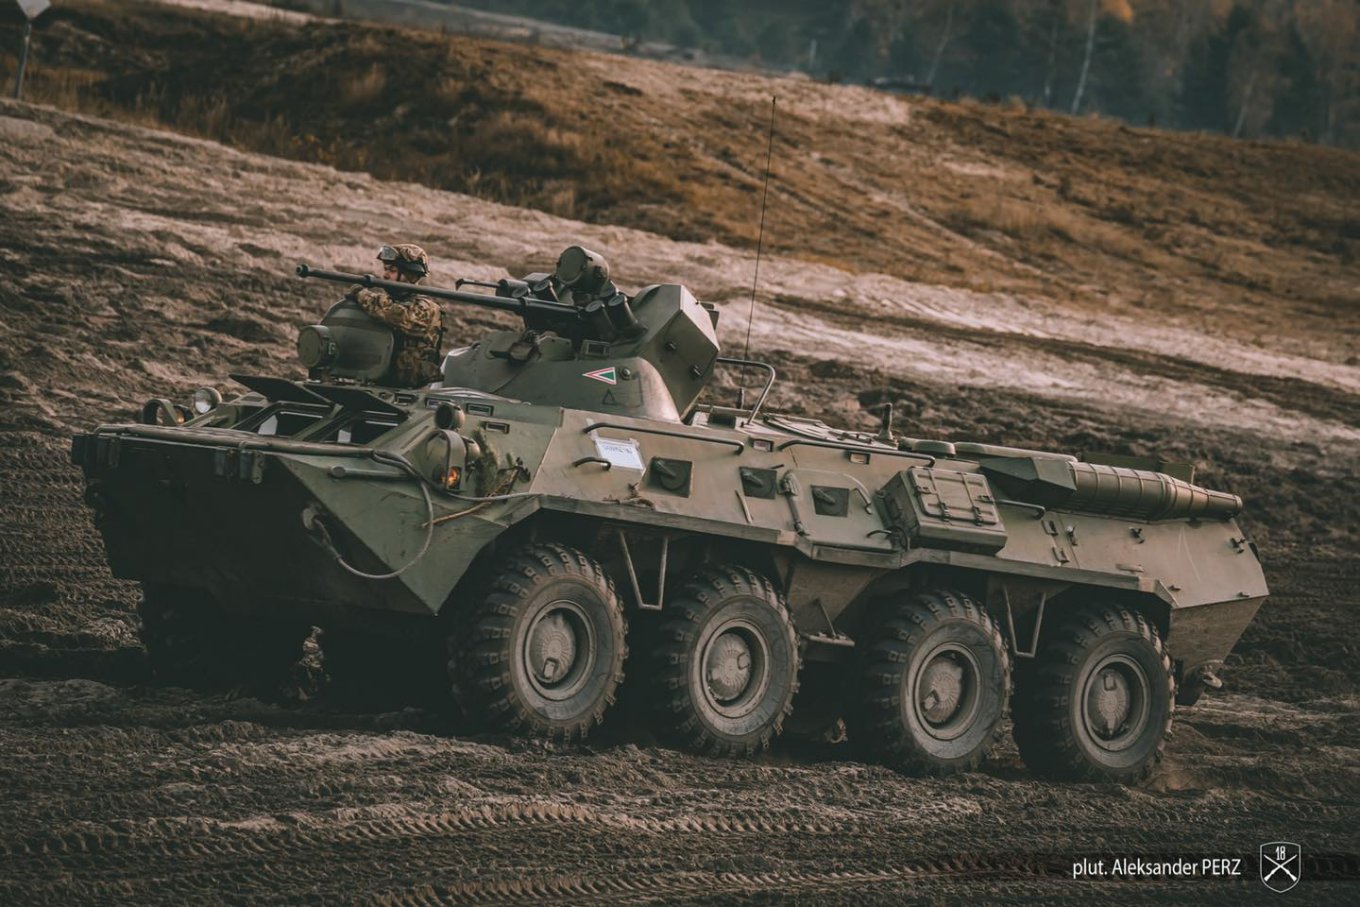 Hungarian BTR-82A, one of the episodes of the Puma-2022 maneuvers, Poland Preparing to Fight Against Russia with a help of Czech and British Tankmen, Defense Express